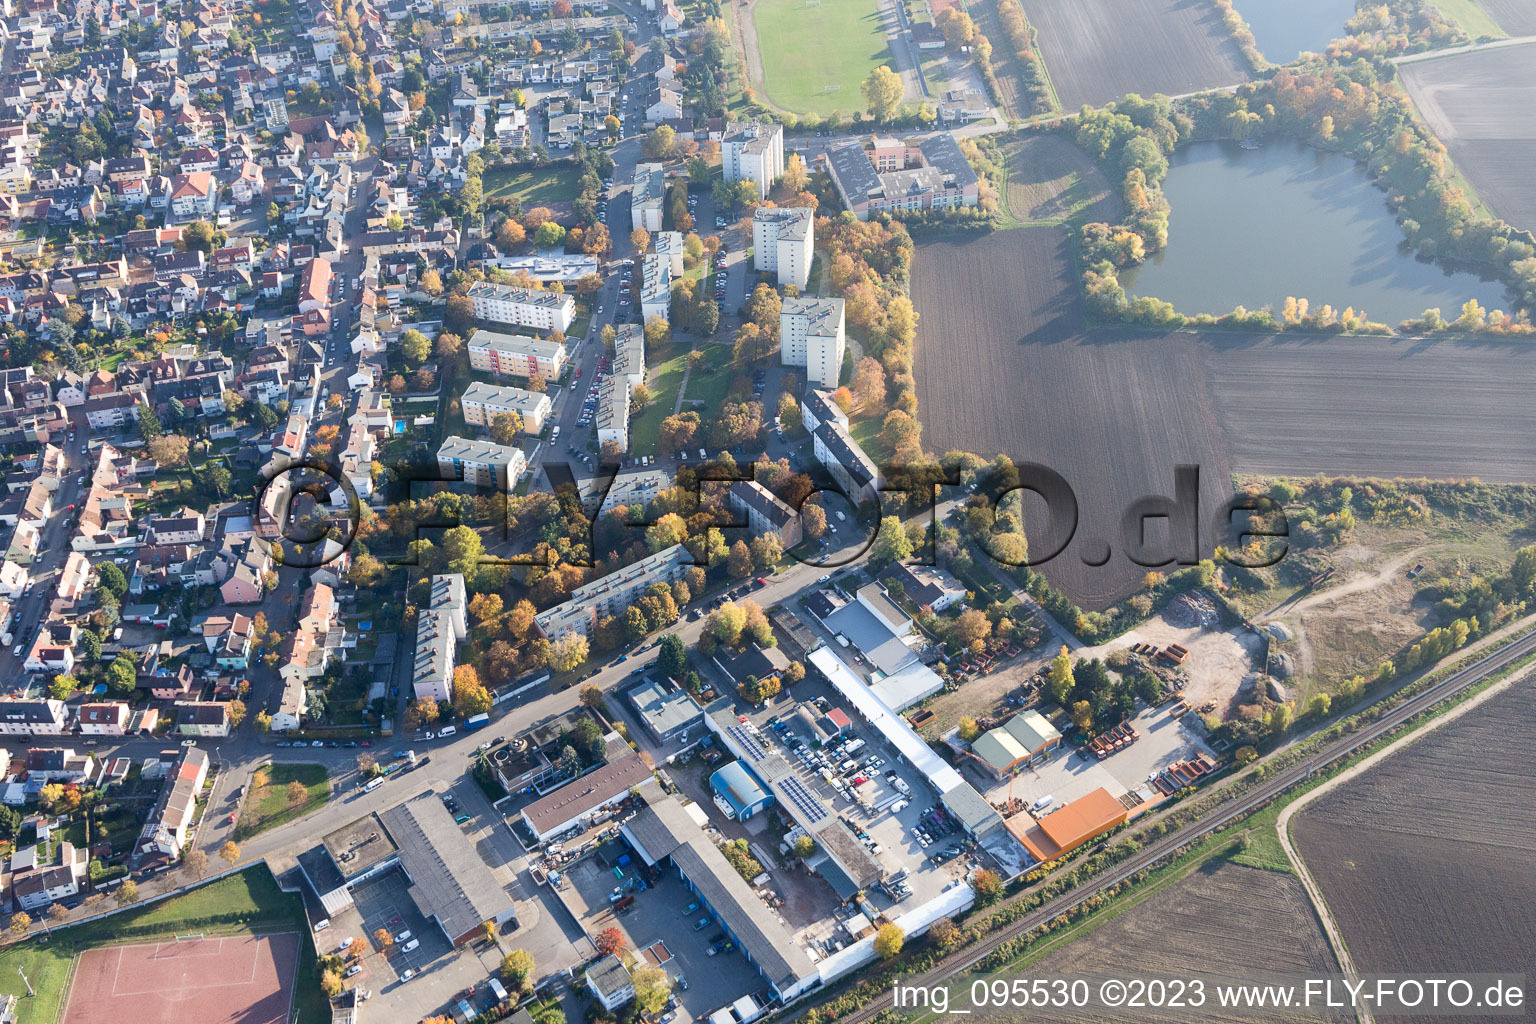 District Oppau in Ludwigshafen am Rhein in the state Rhineland-Palatinate, Germany from the drone perspective